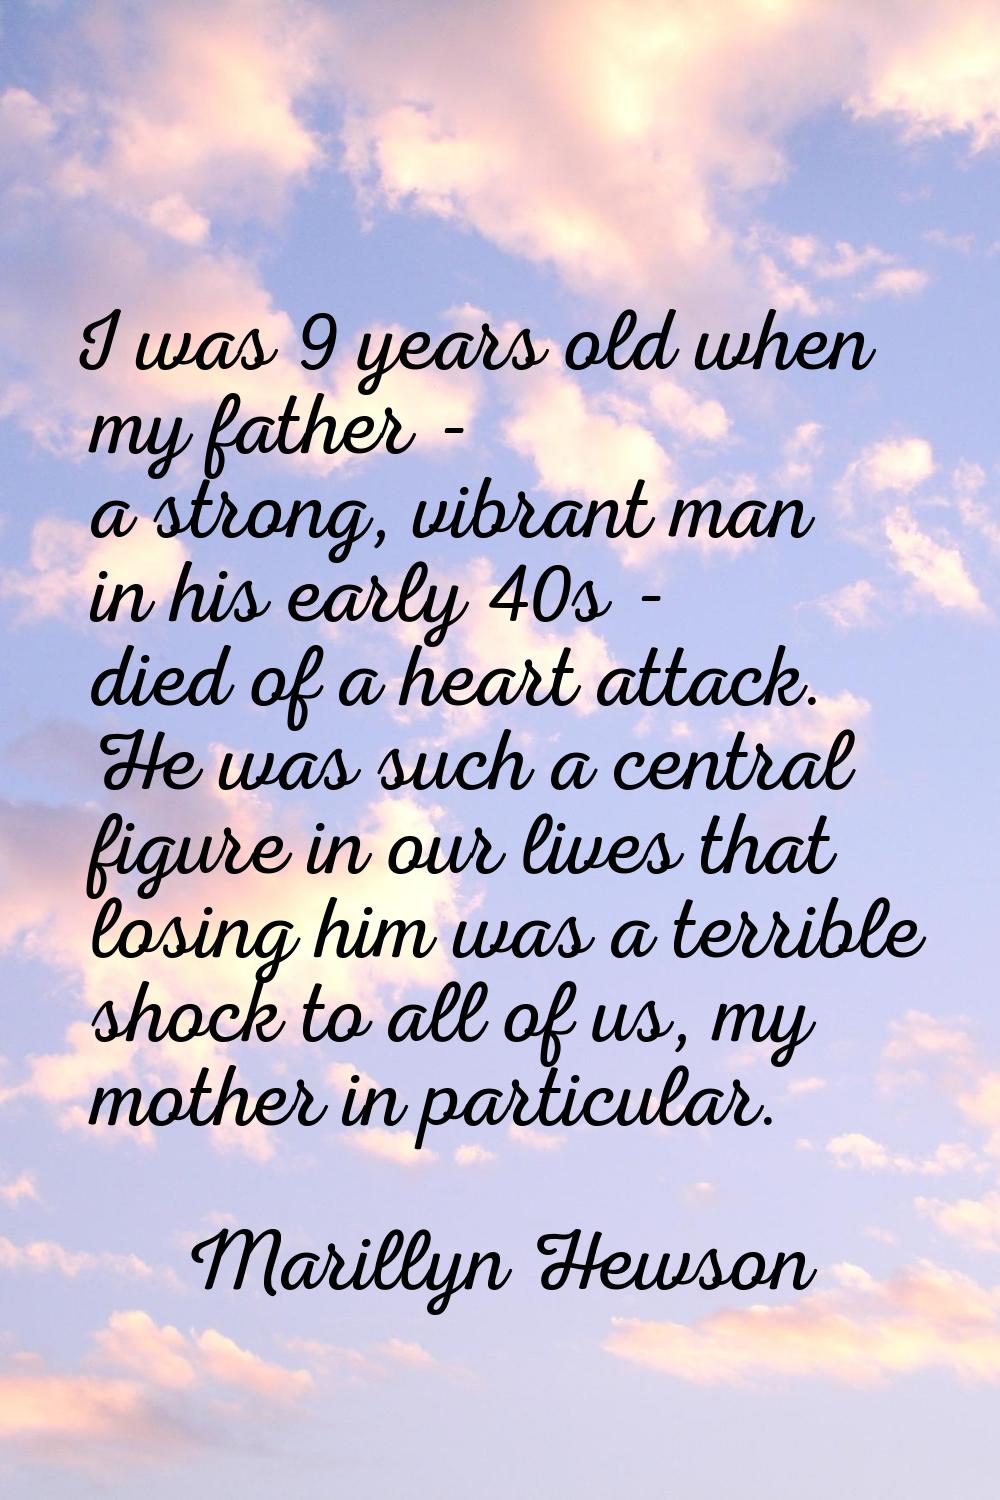 I was 9 years old when my father - a strong, vibrant man in his early 40s - died of a heart attack.